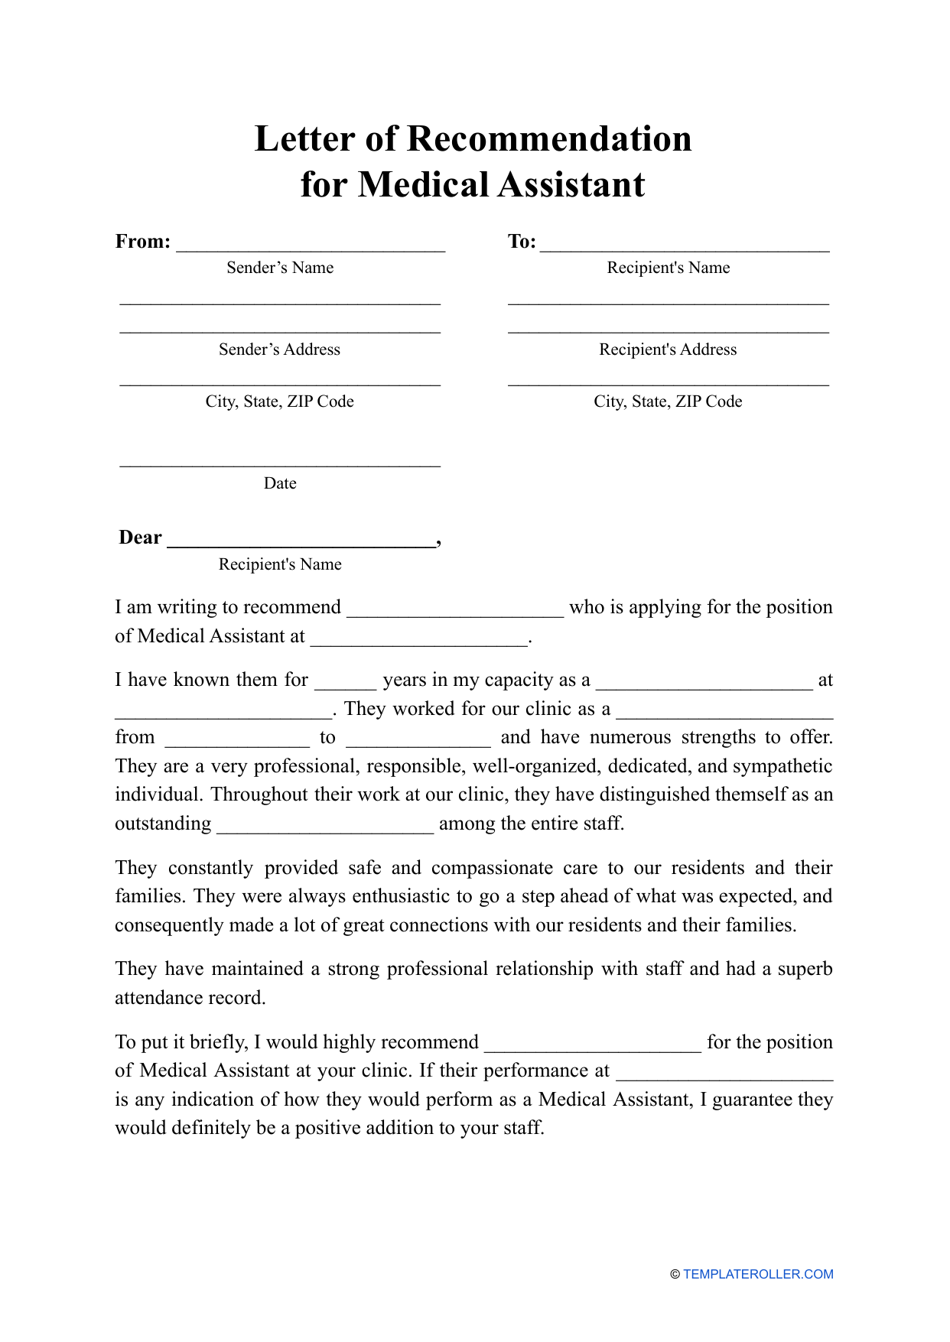 letter-of-recommendation-for-medical-assistant-template-download